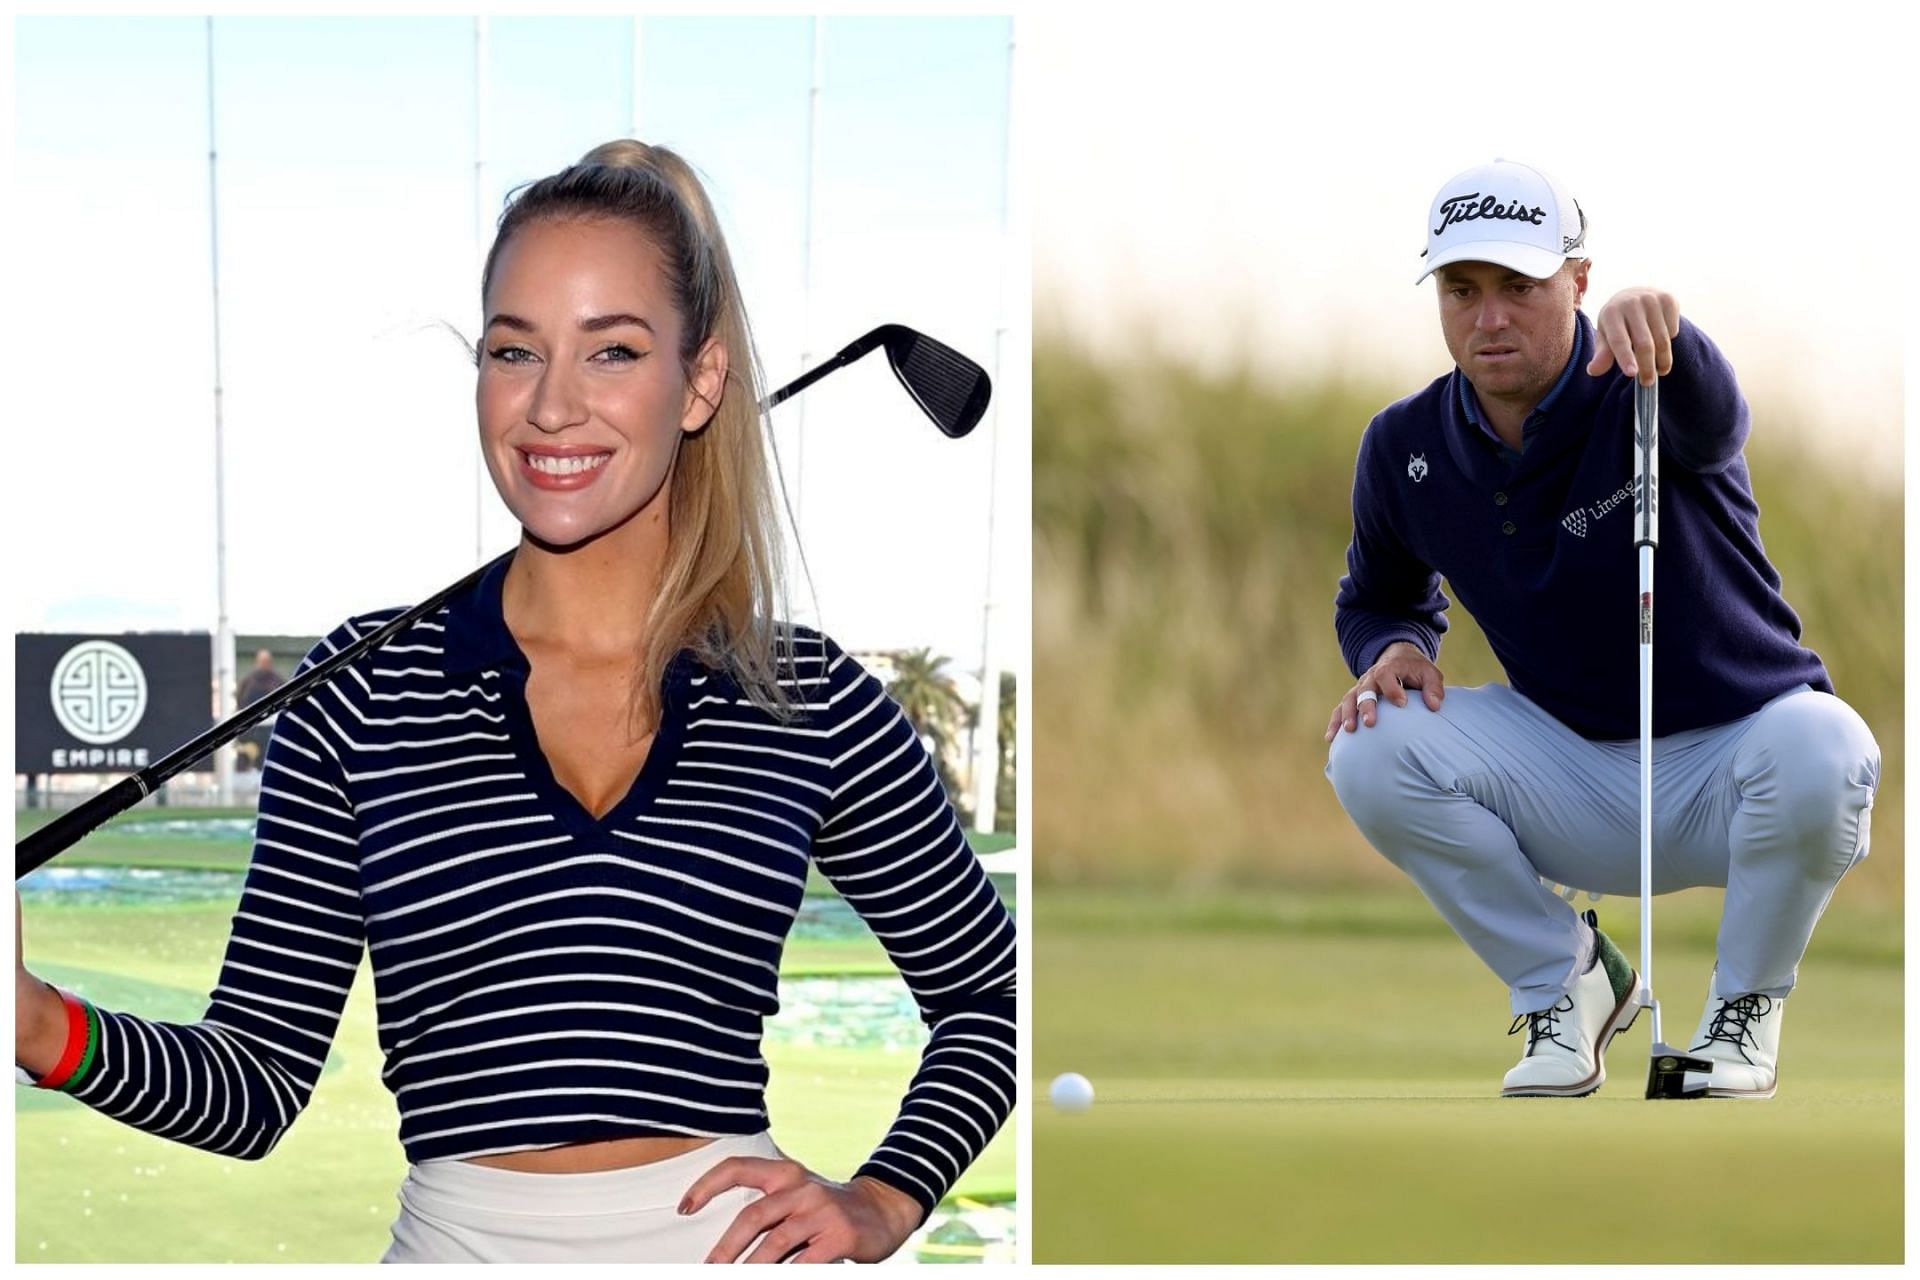 Paige Spiranac believes Justin Thomas will be part of Ryder Cup 